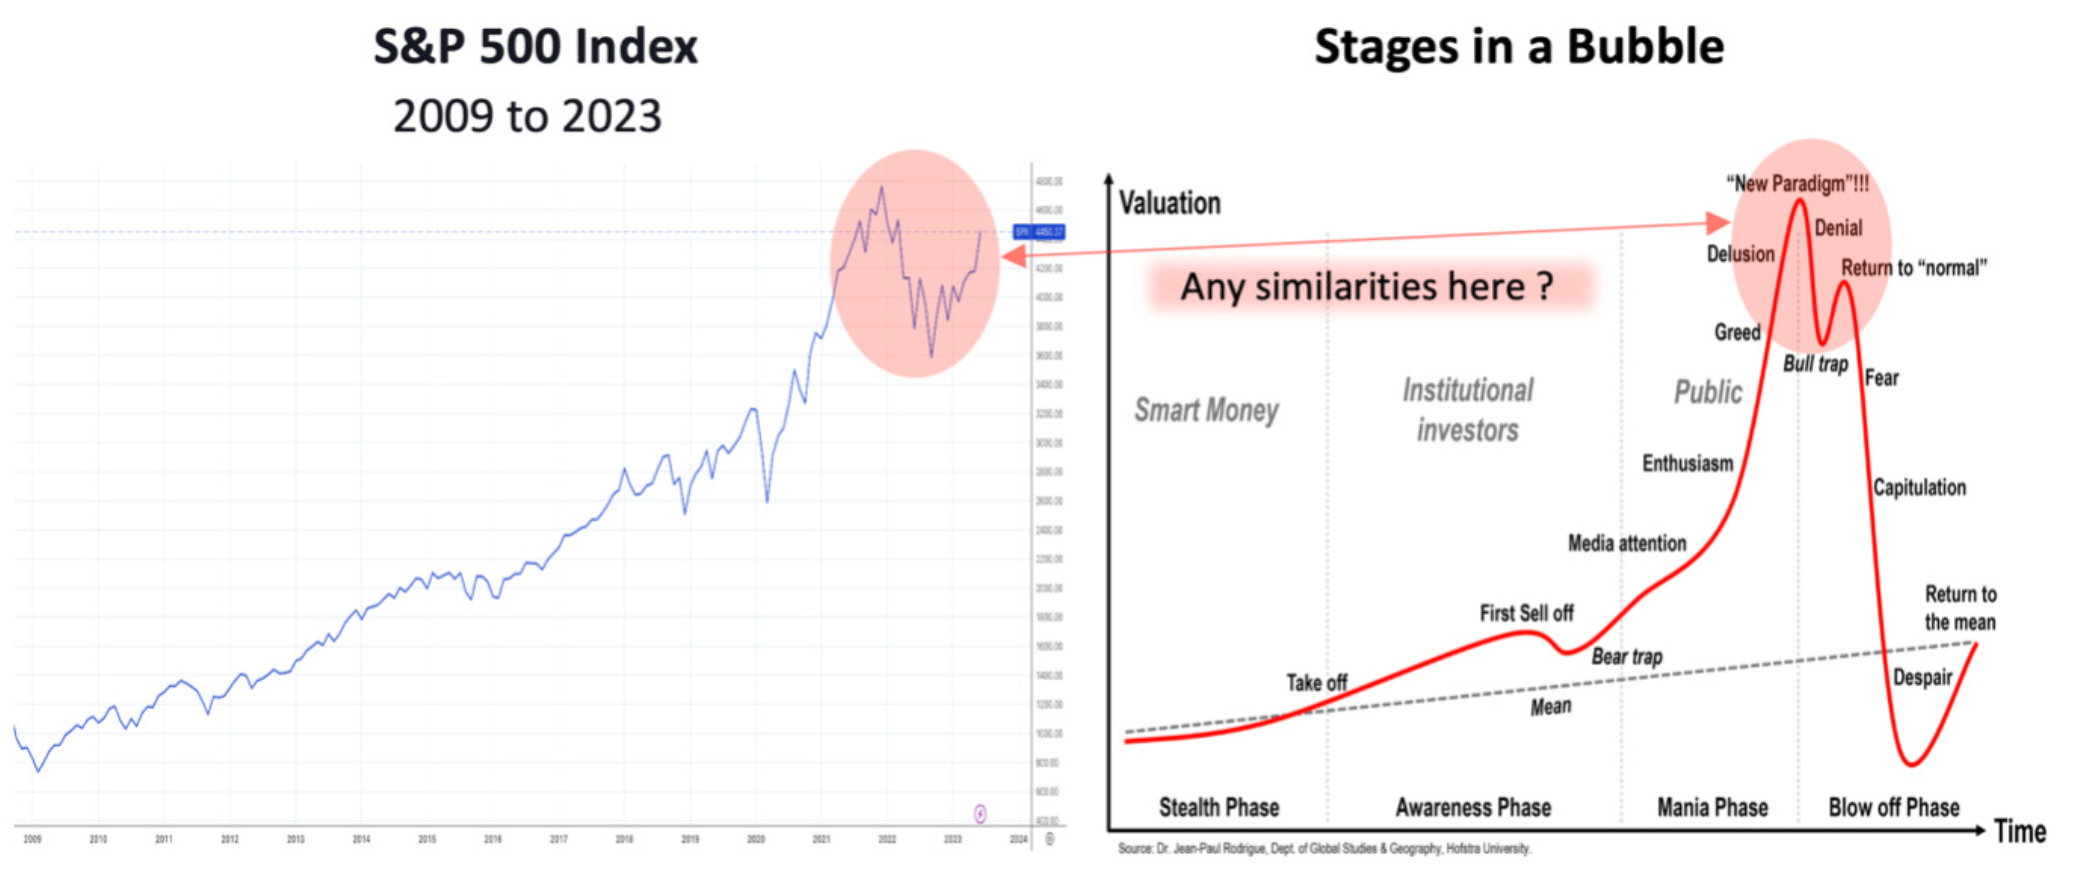 S&P 500 Index 2009 to 2023 - Stages in a Bubble